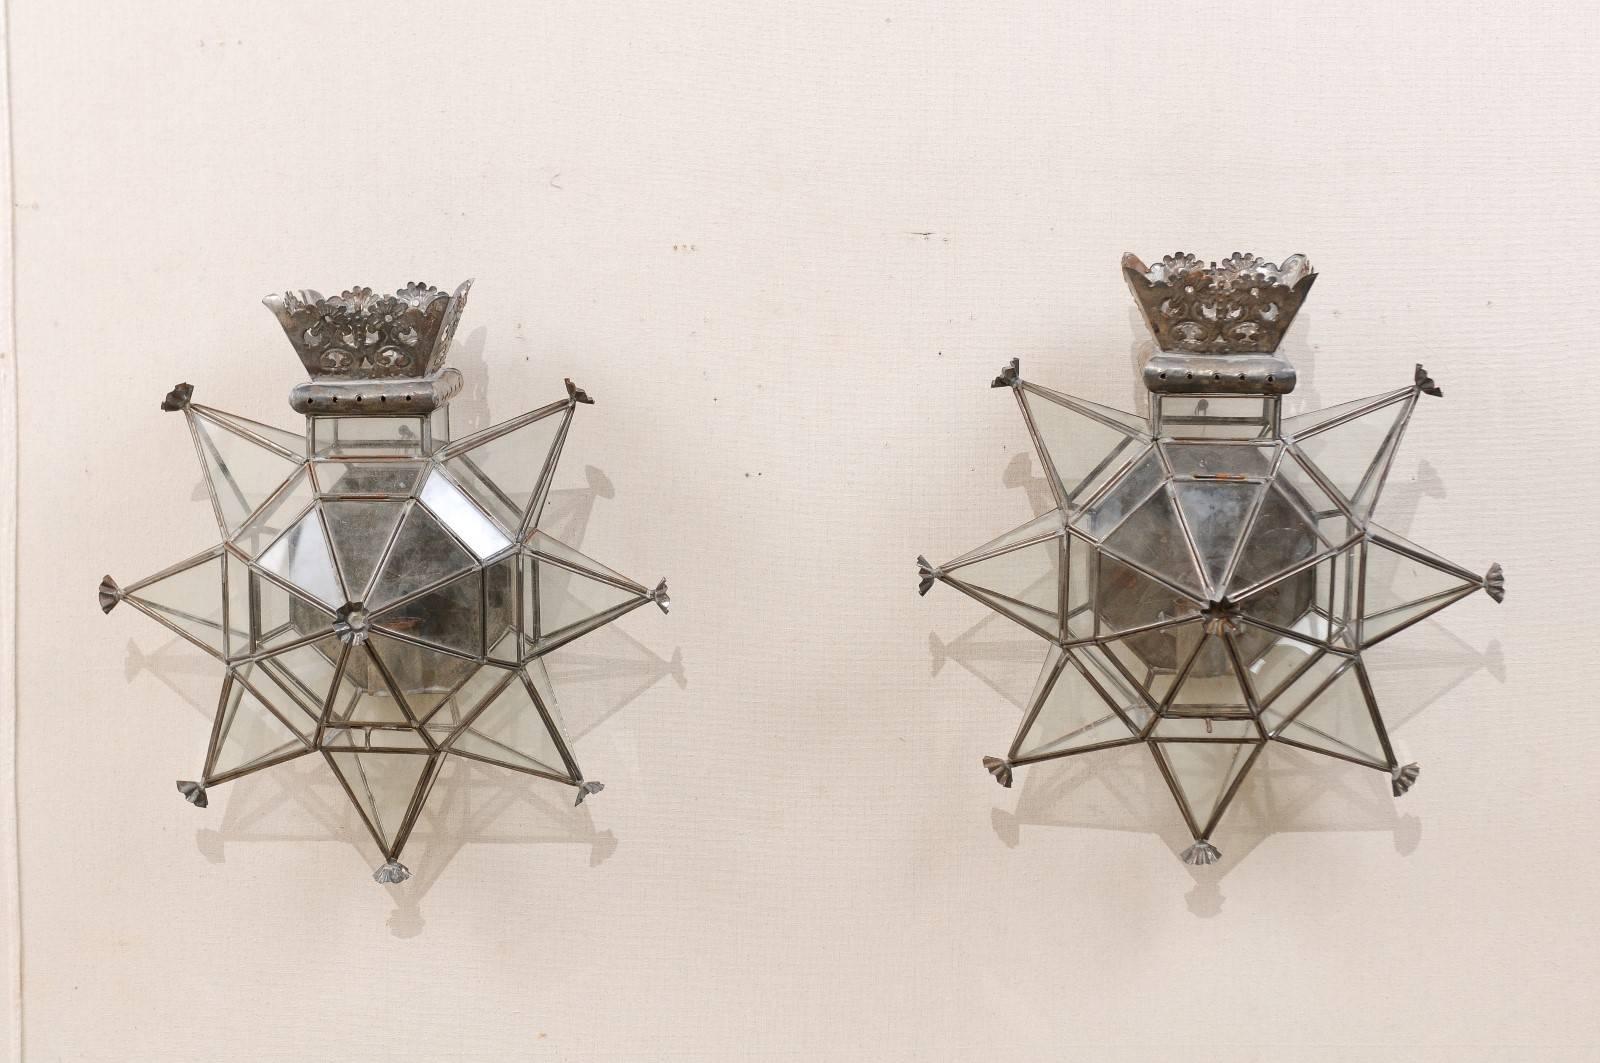 A pair of Mexican silver color star-shaped sconces. This pair of Mexican single candle sconces have been handcrafted from old tin and glass. These Folk Art sconces are both whimsical and noble in style with their glass, star-shaped bodies and floral